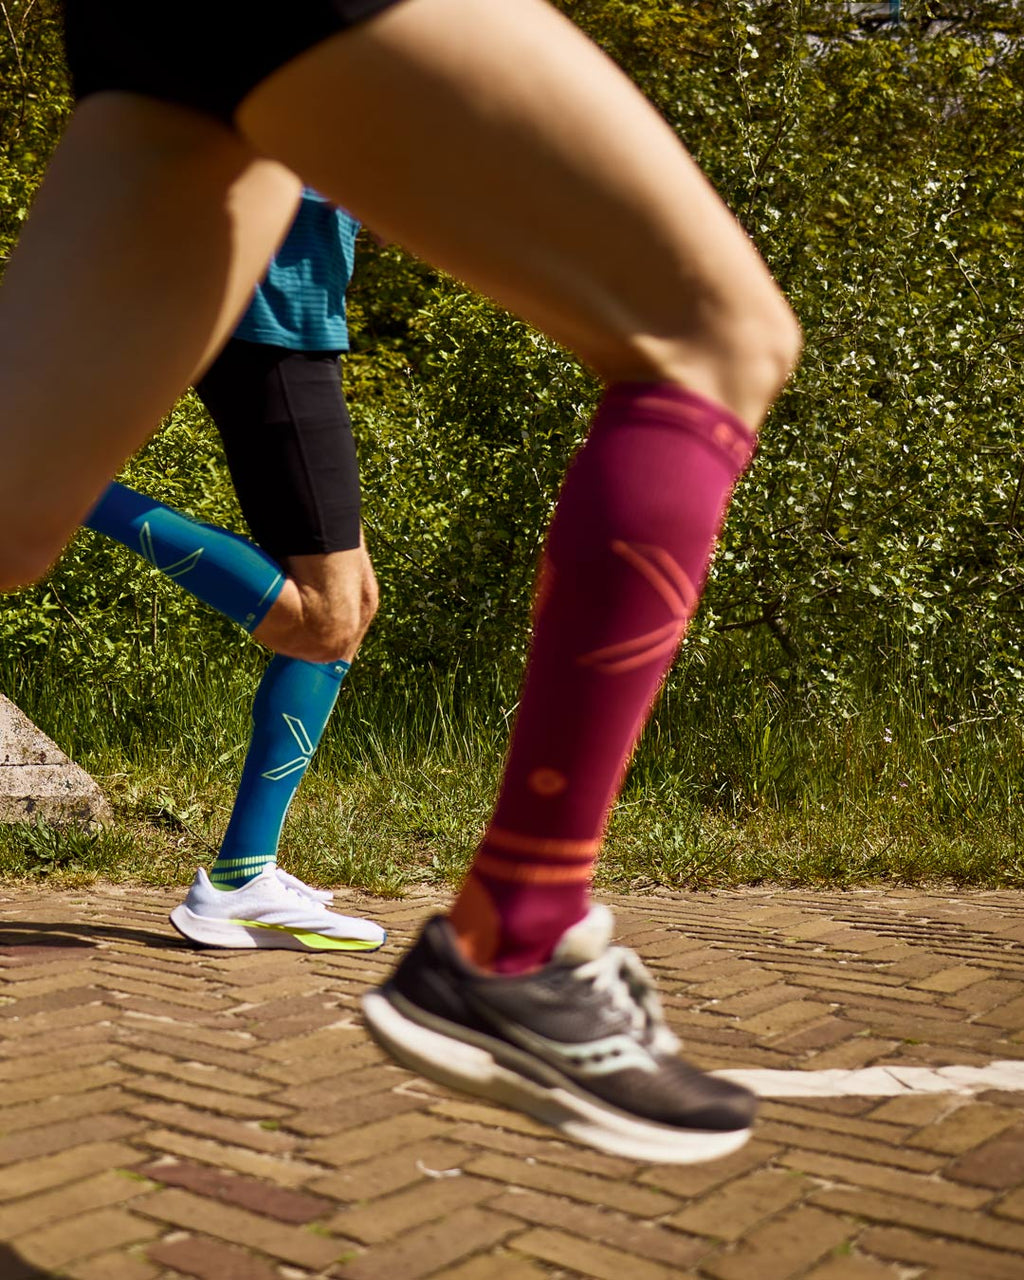 Should You Work out or Lift in Compression Socks?